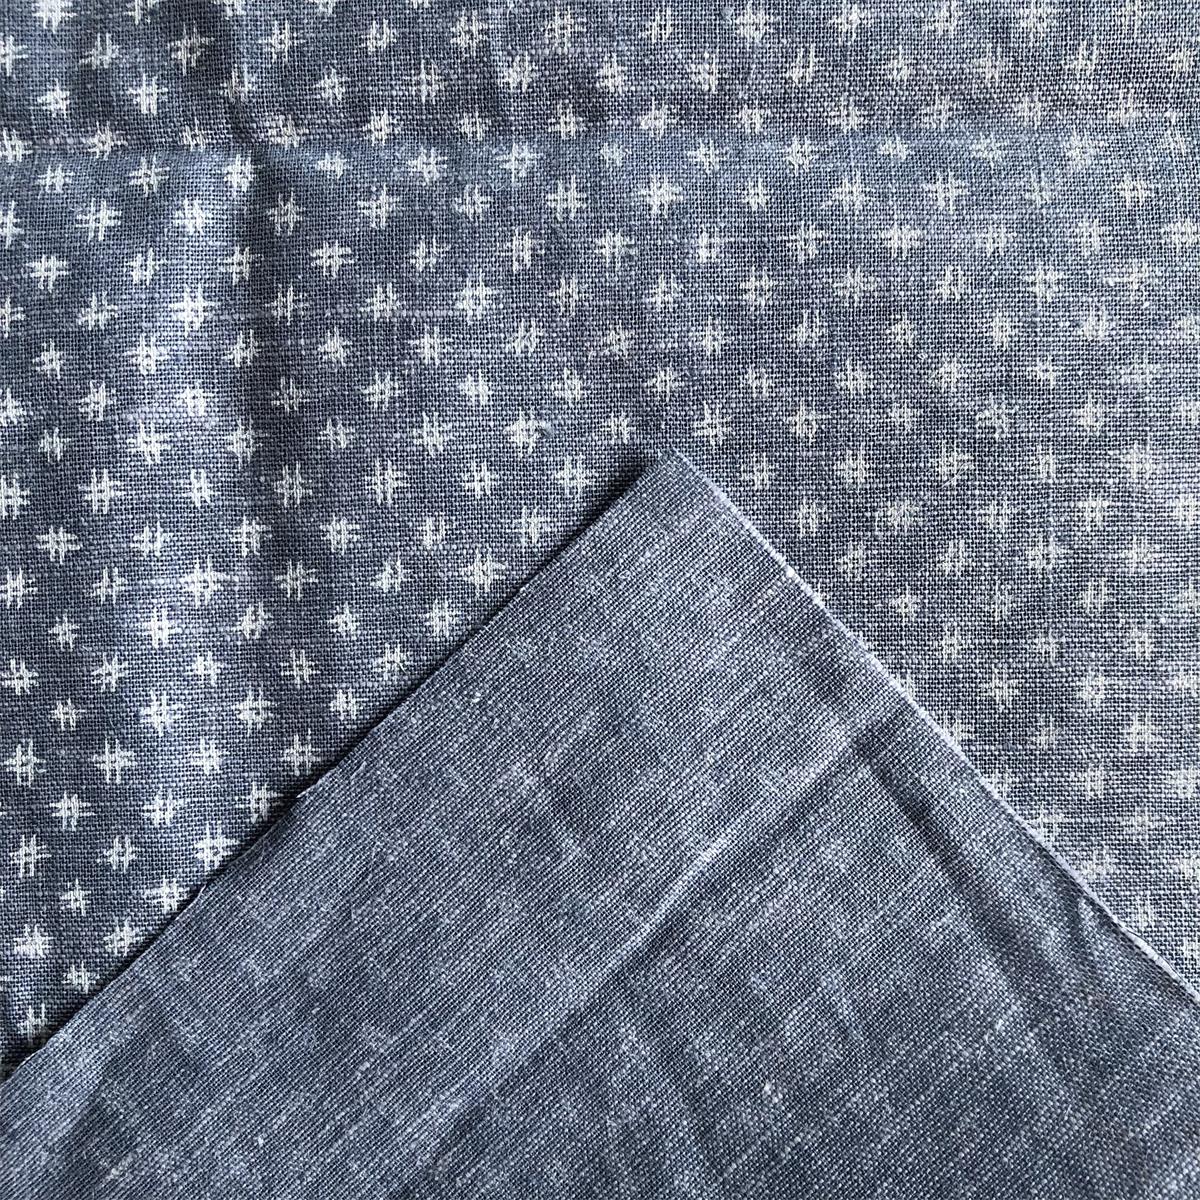 Linen Cotton Fabric for men's shirts 55% linen 45% cotton printed on chambray shirts woven fabric